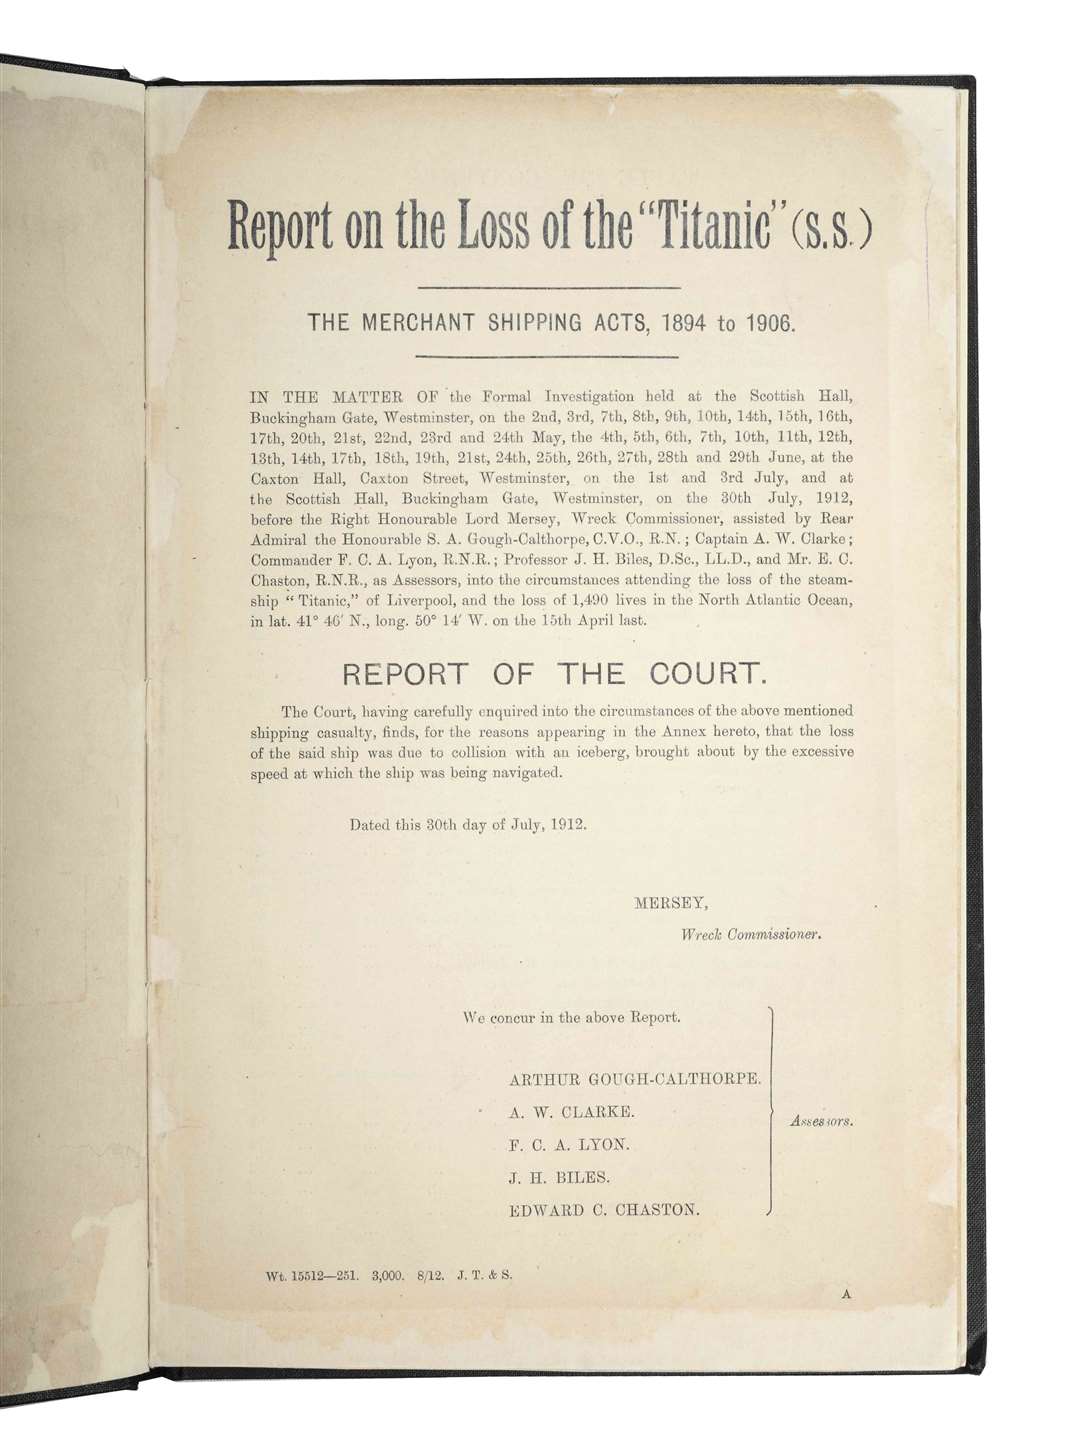 A rare report of the first British investigation into the sinking of the Titanic (Robert Malone/PA)